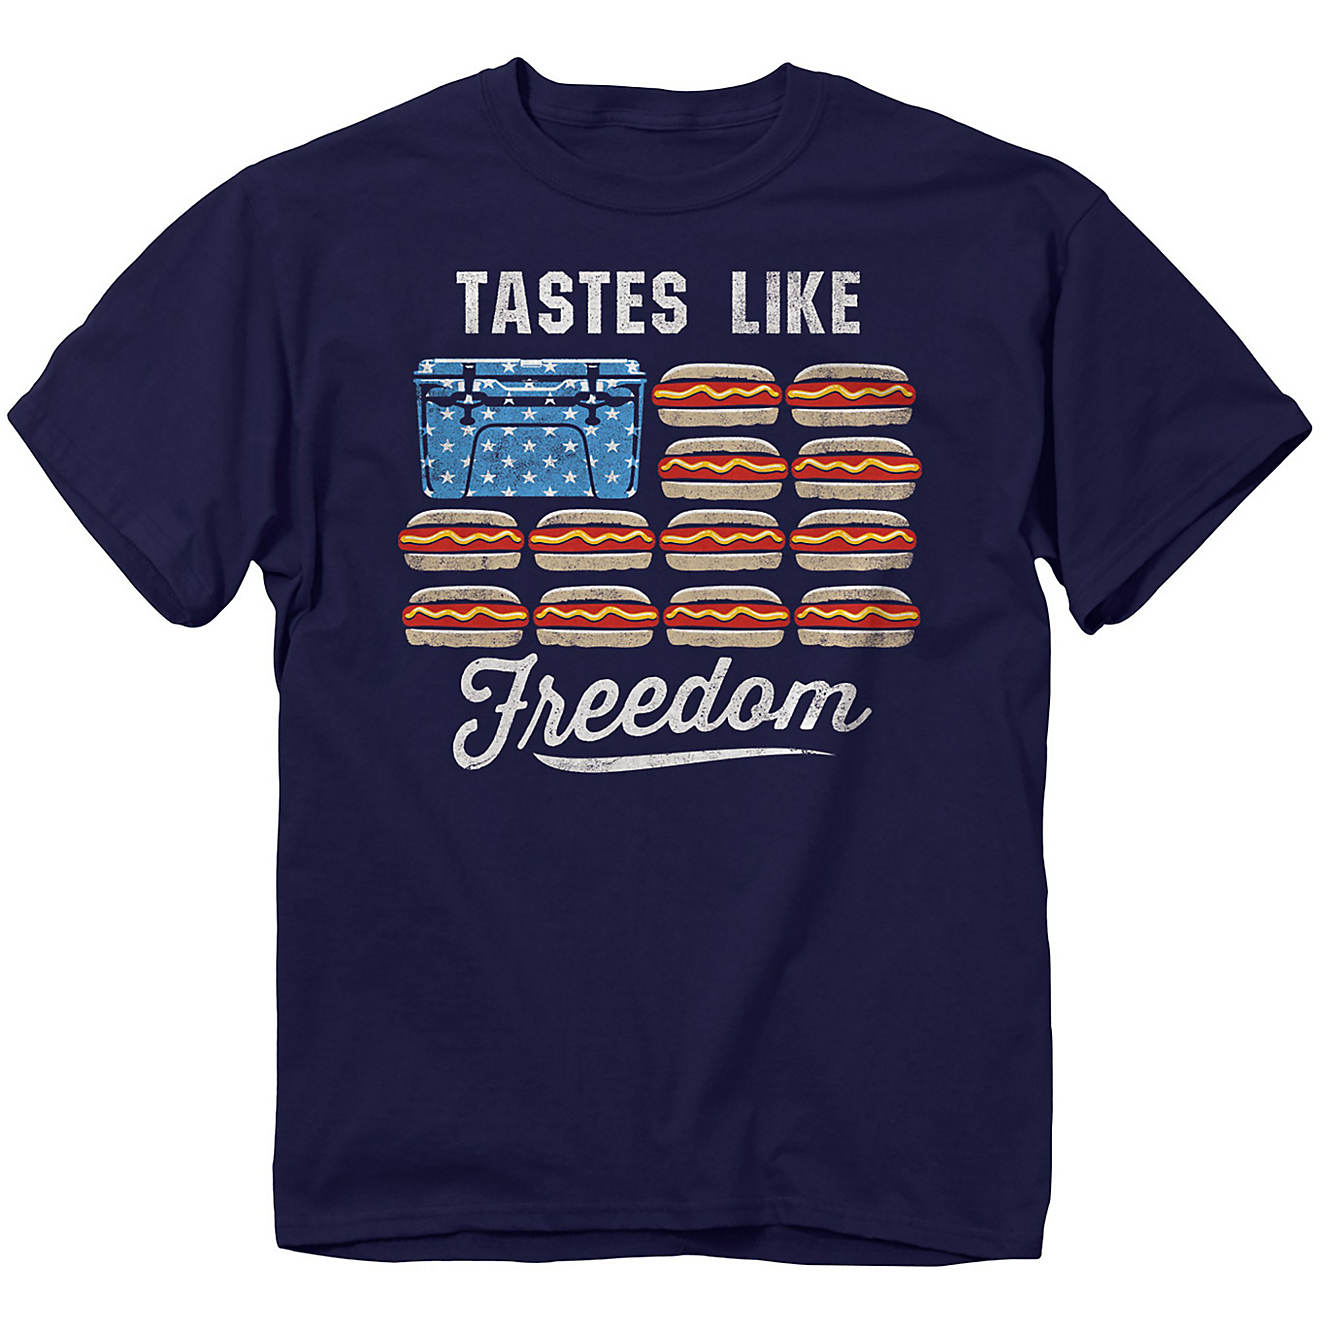 Academy Sports + Outdoors Men’s Tastes Like Freedom T-shirt                                                                    - view number 1